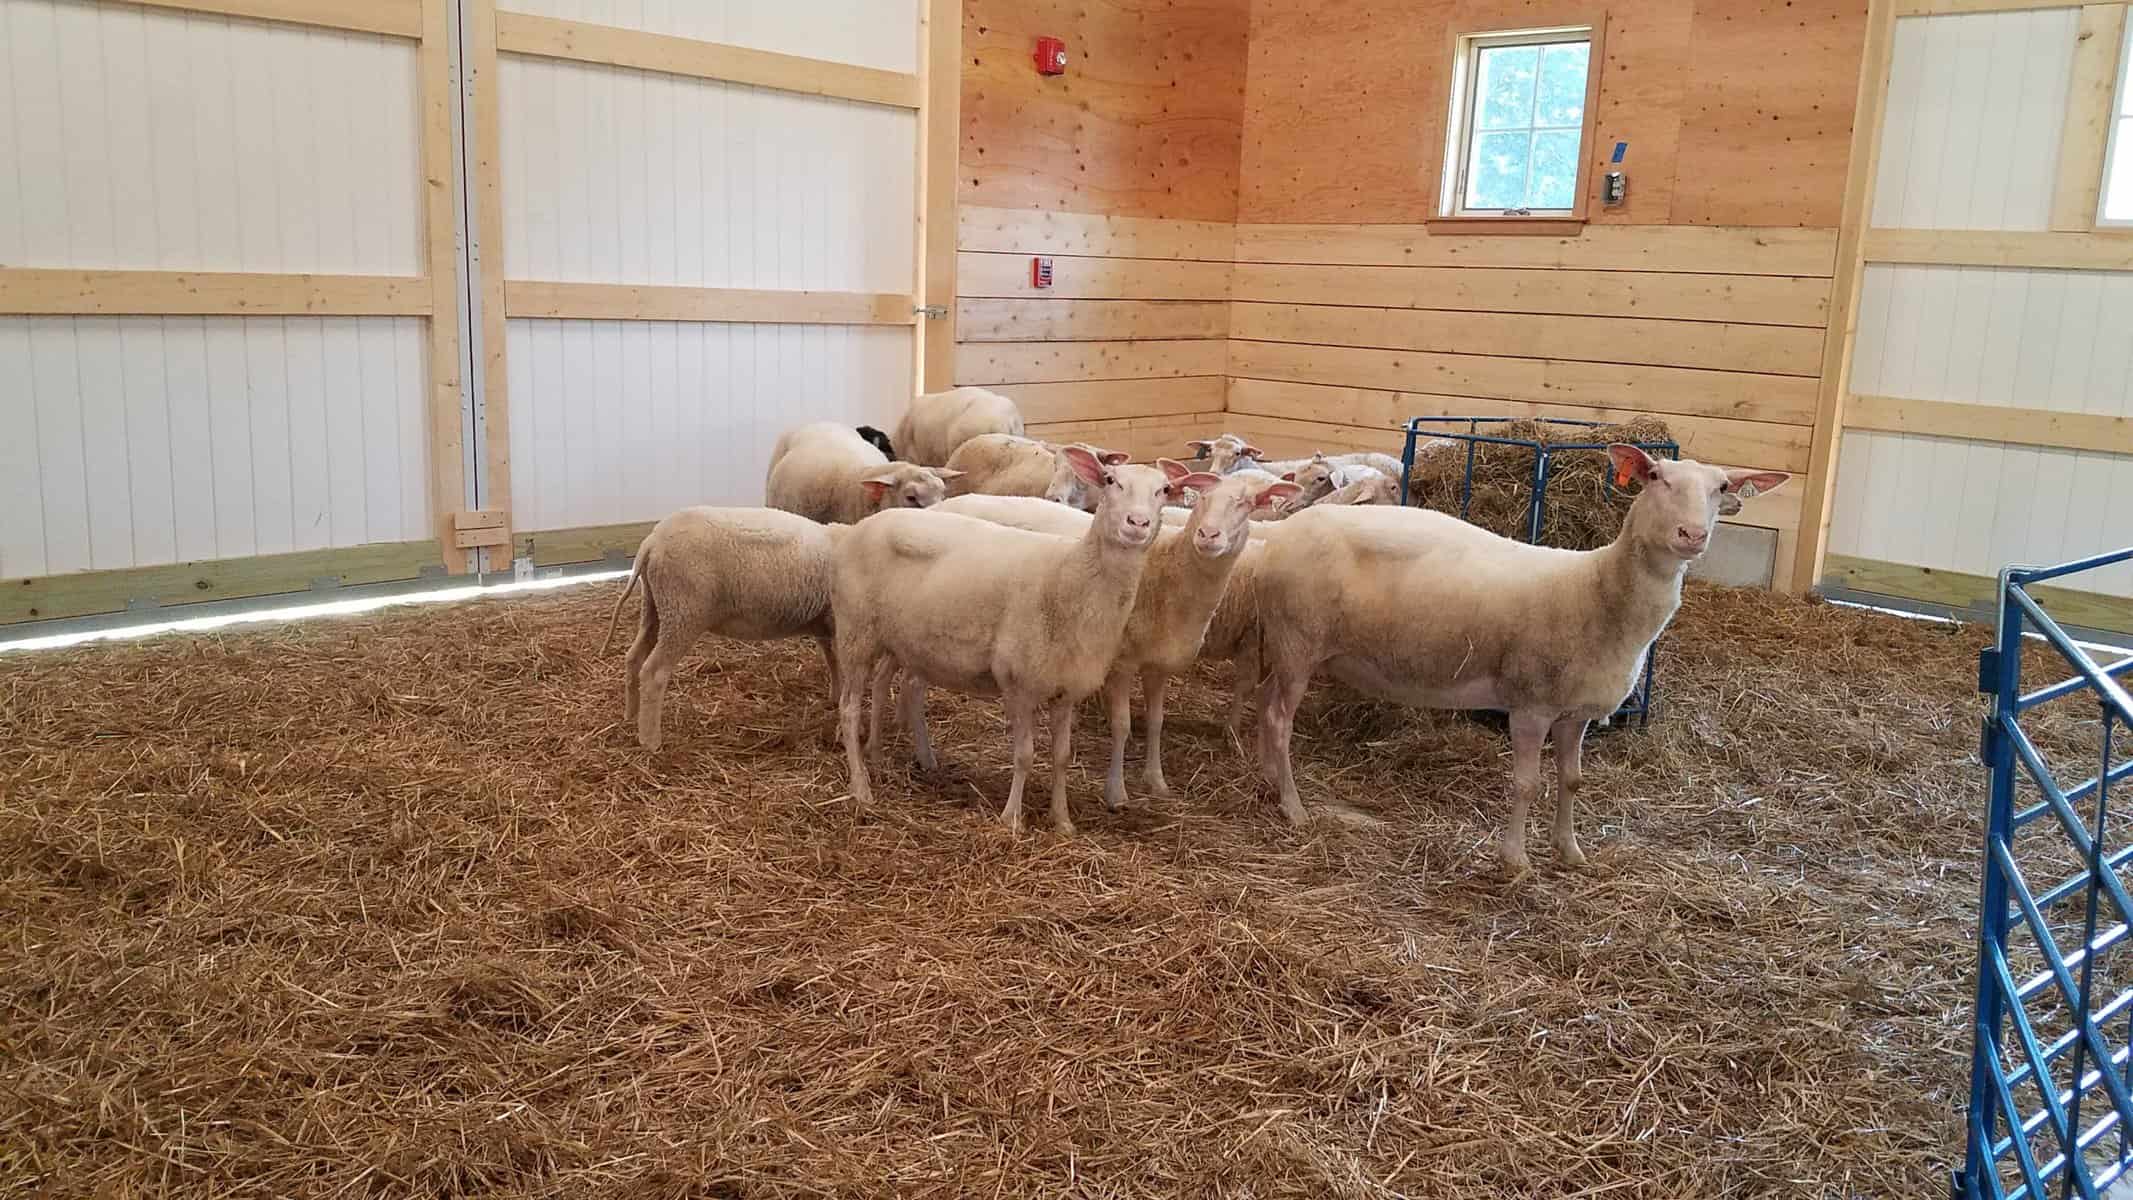 The sheep barn design required adequate space for a herd size of 100, including feed storage and flexible pens for when lambs are being born.